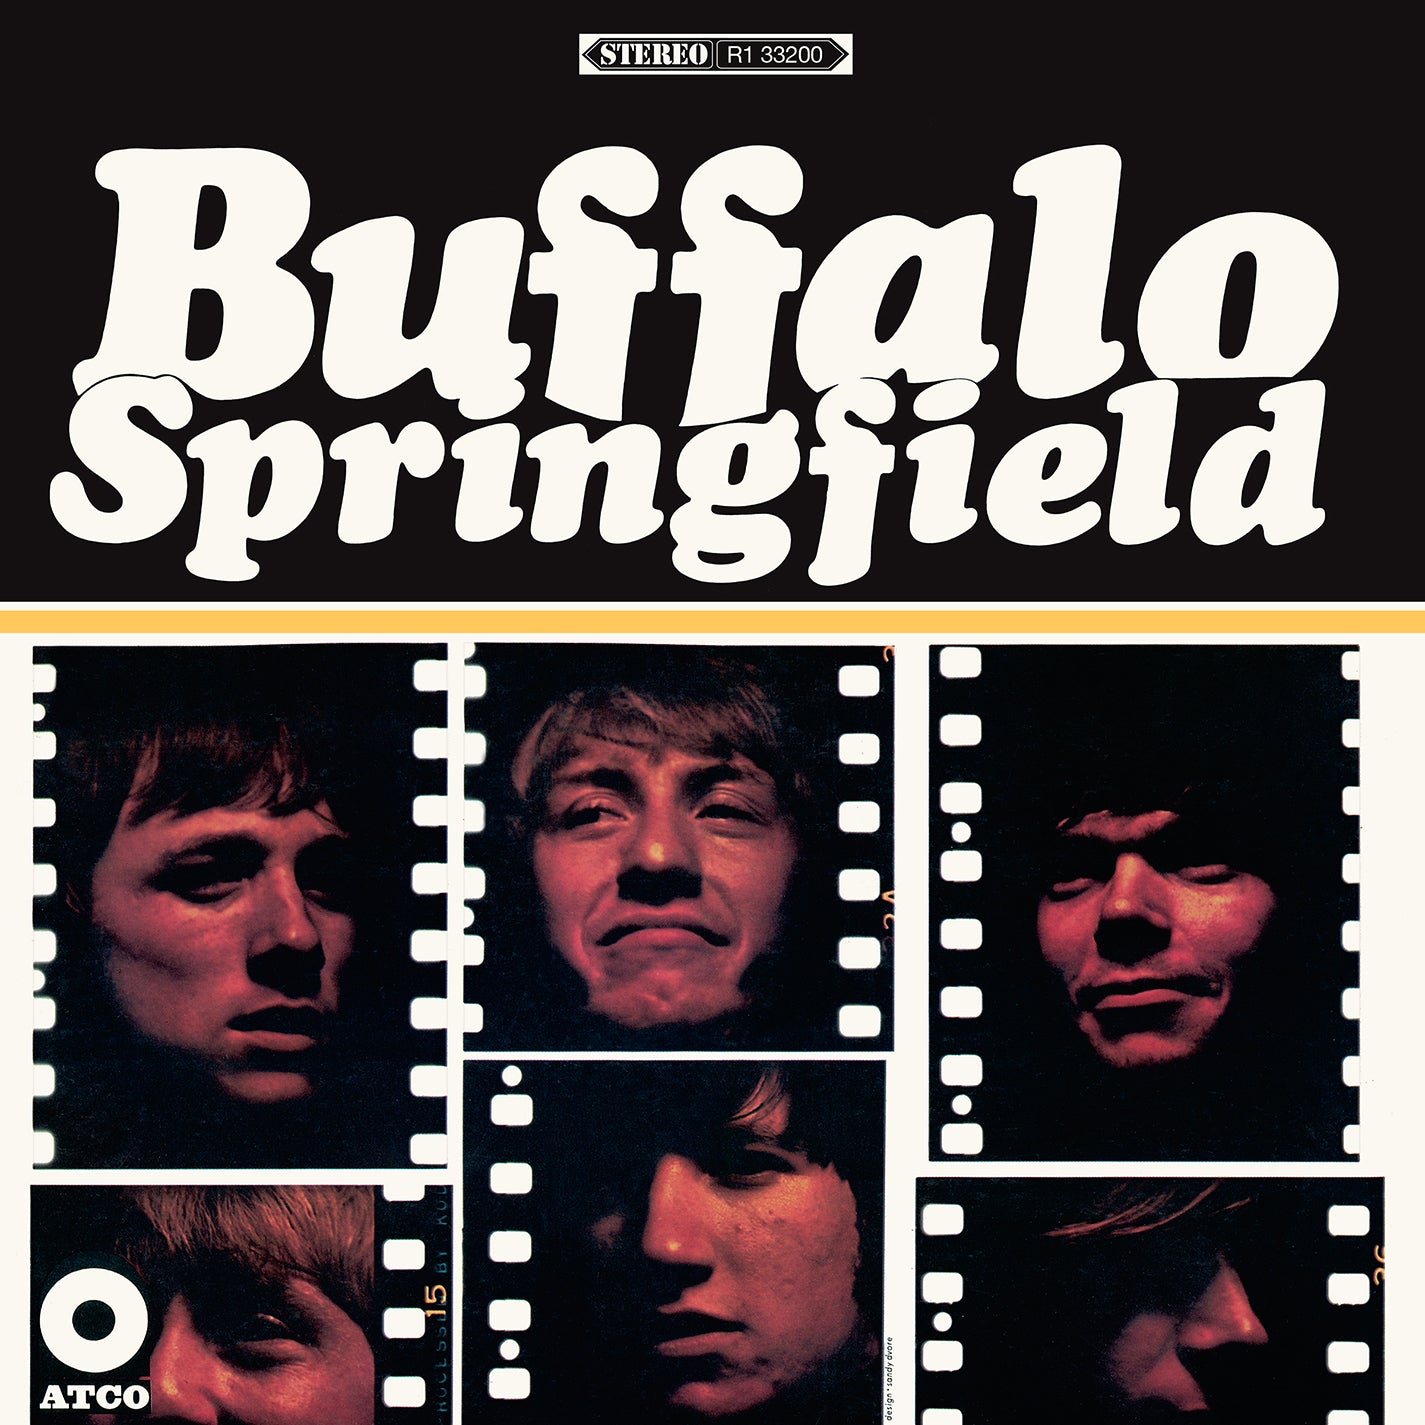 Buffalo Springfield - Buffalo Springfield [Black Vinyl] [Rhino Summer Of 69 Exclusive]